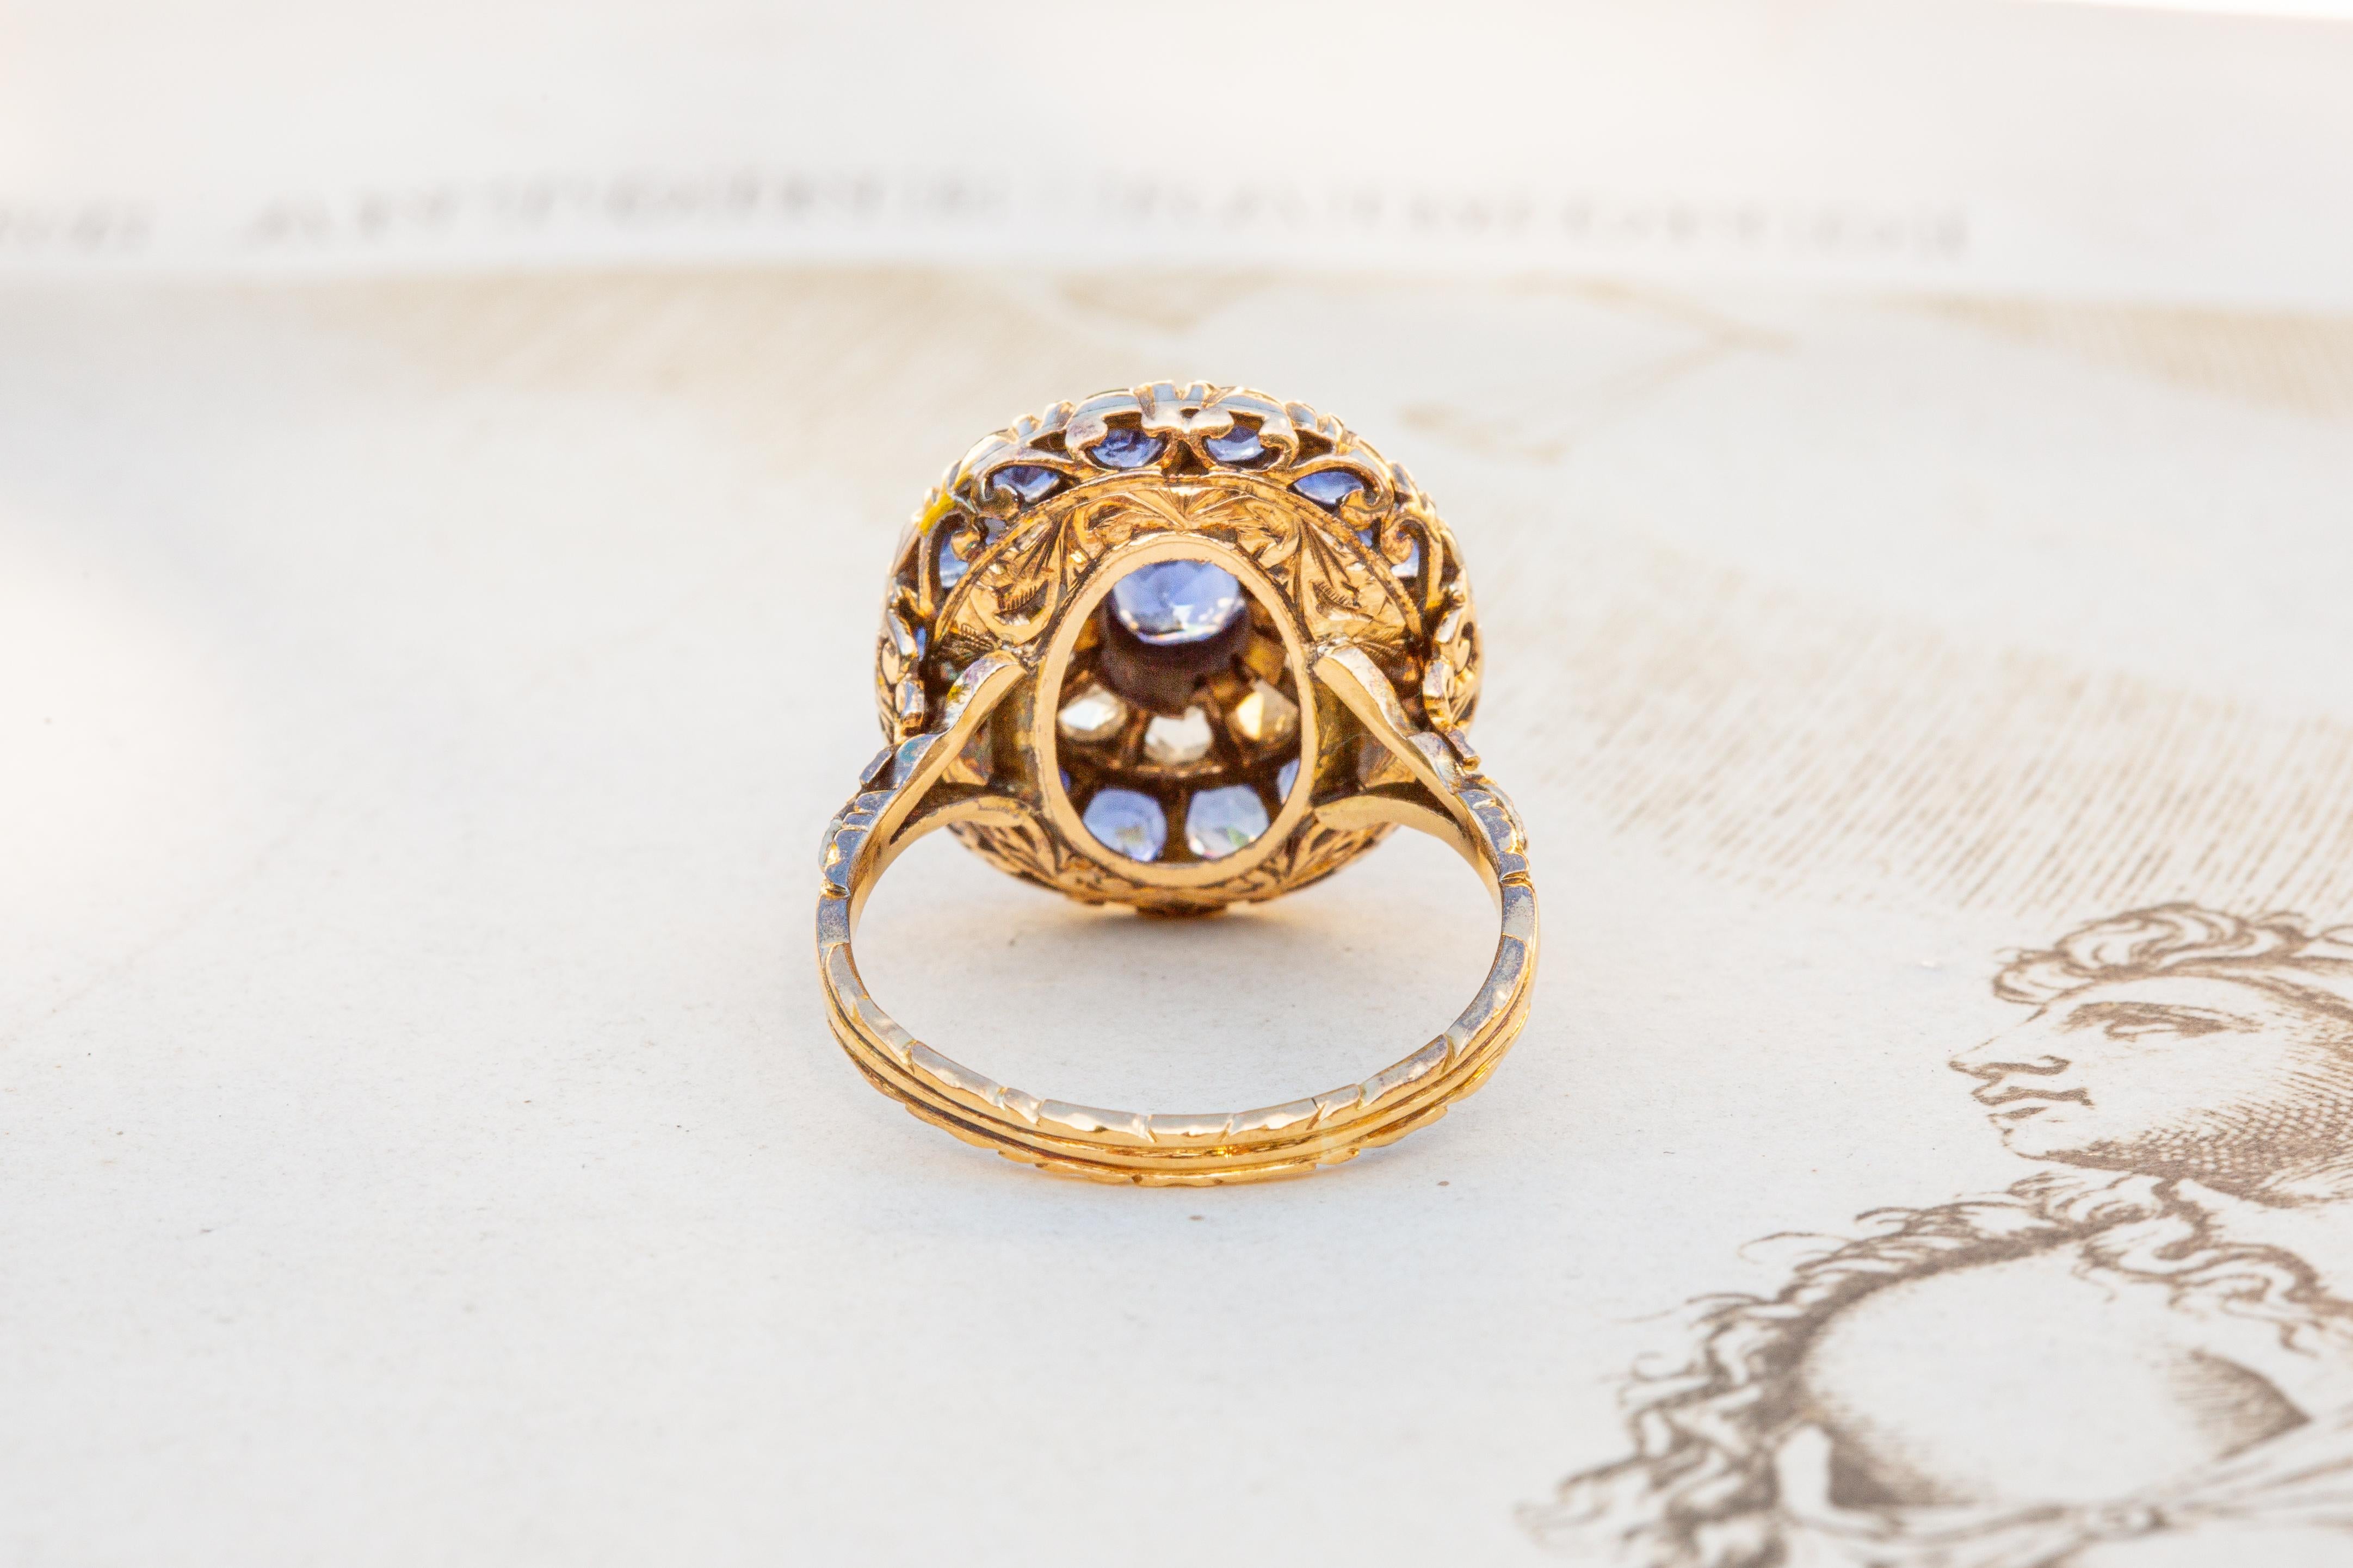 Antique Cushion Cut Antique Sapphire and Diamond Cluster Ring Dutch Georgian Style Ring Early 20th